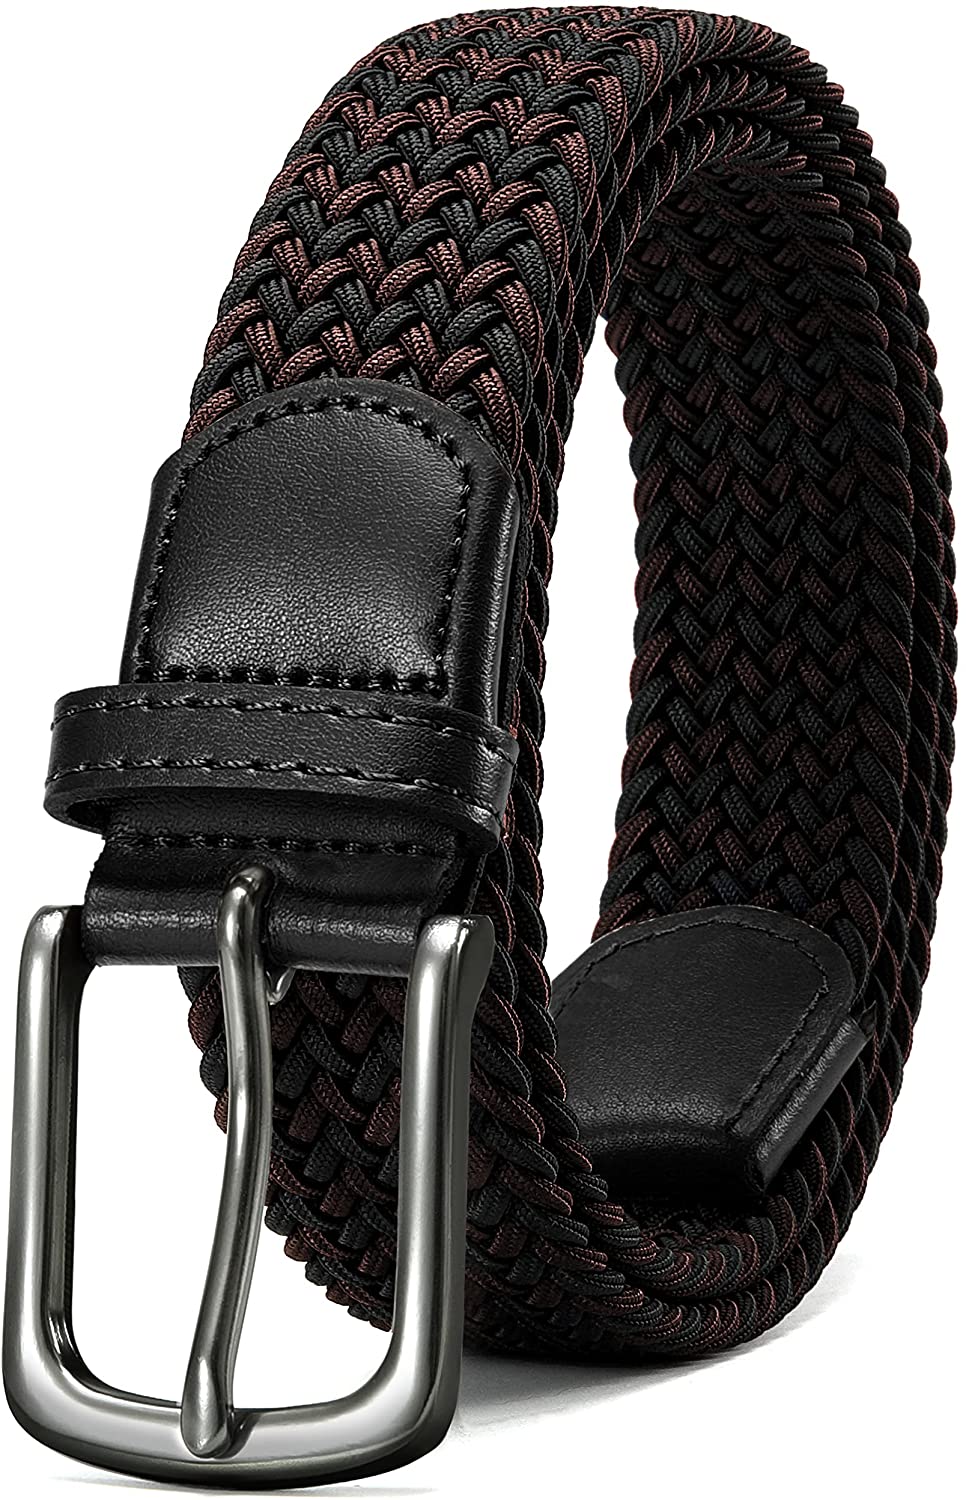 Stretch Braided Golf Belts for Men 1 3/8, Casual Woven Elastic Belt in  Gift Box